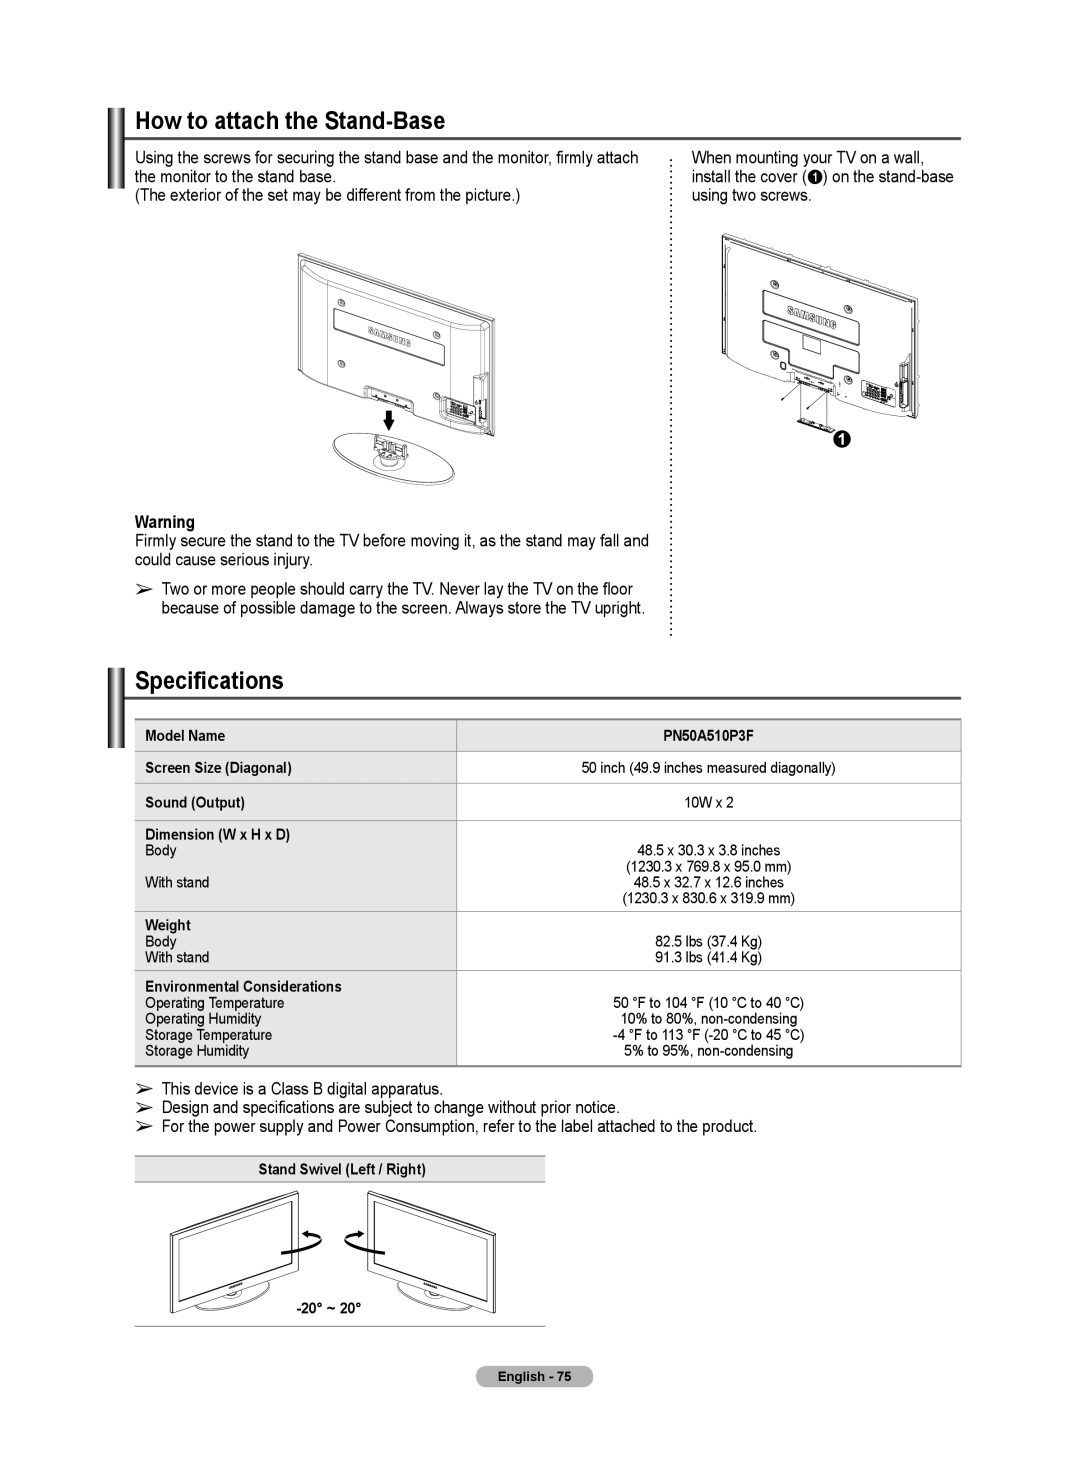 Samsung 510 user manual How to attach the Stand-Base, Specifications 